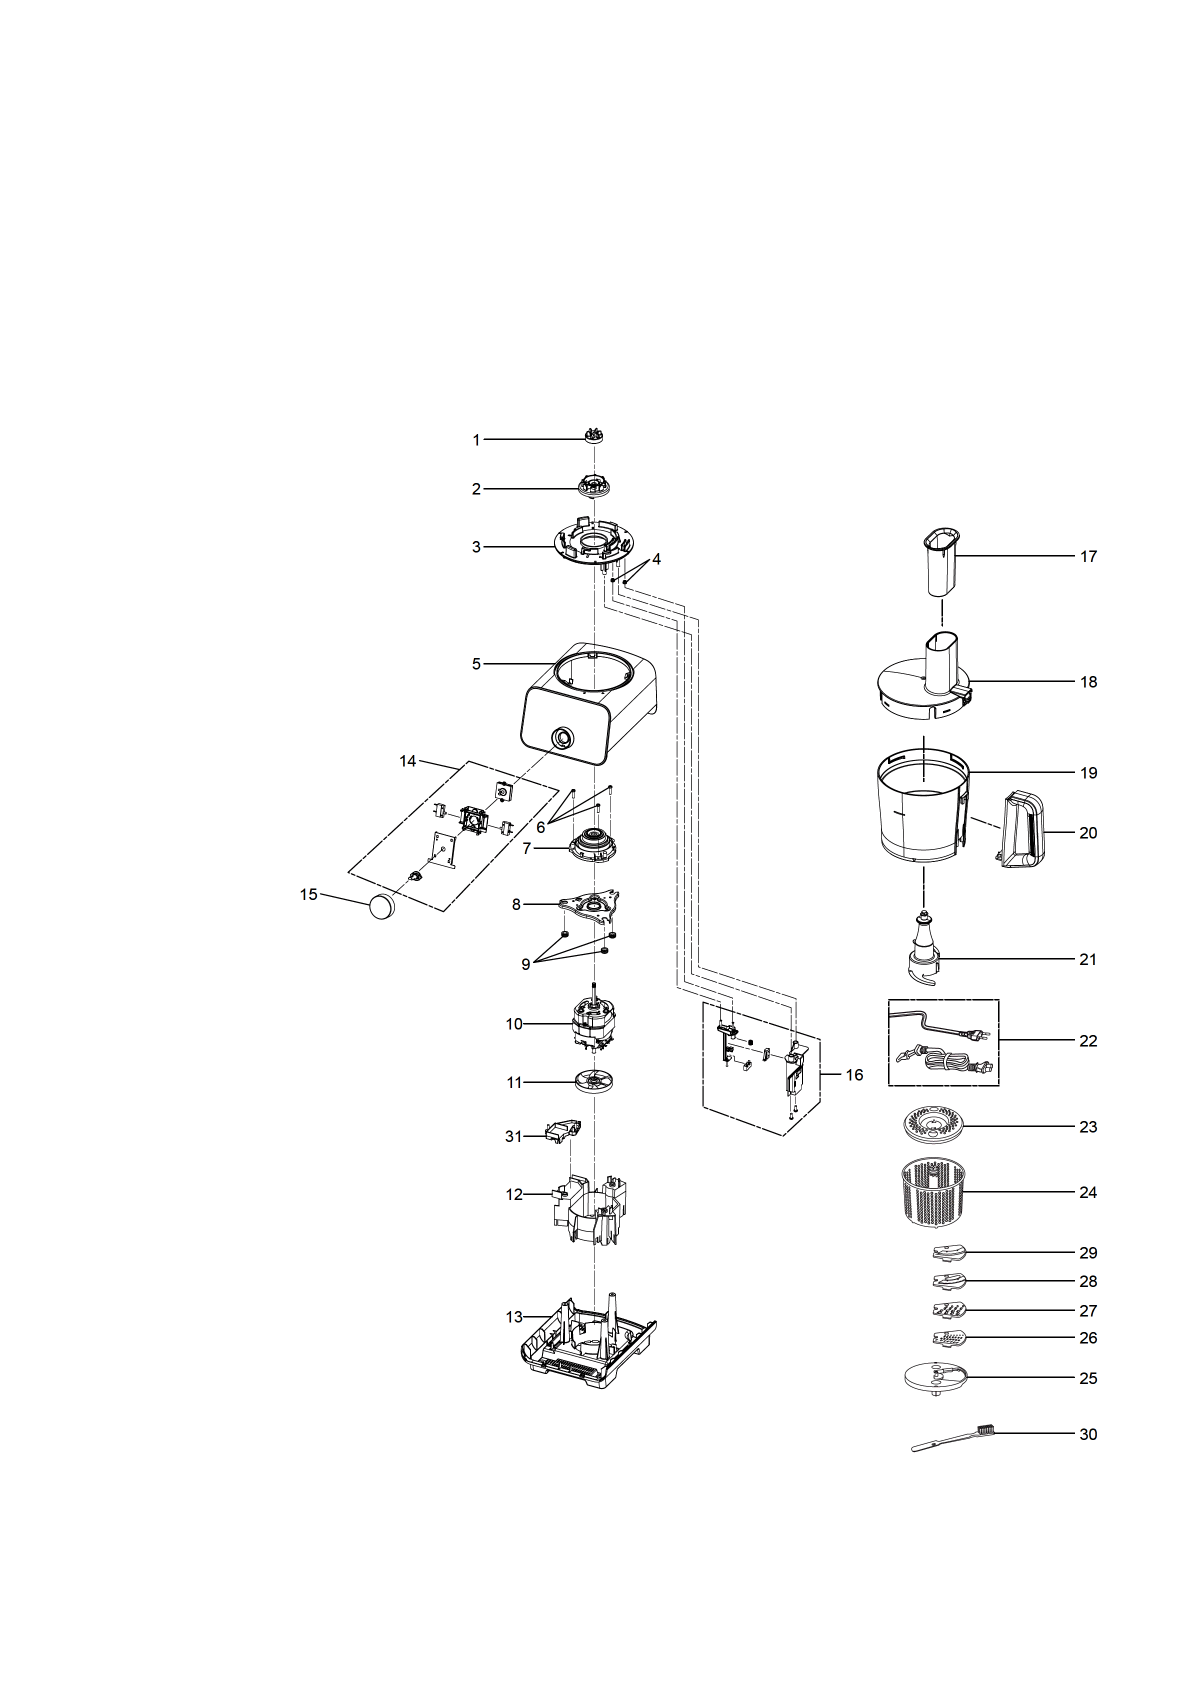 MK-F300: Exploded View